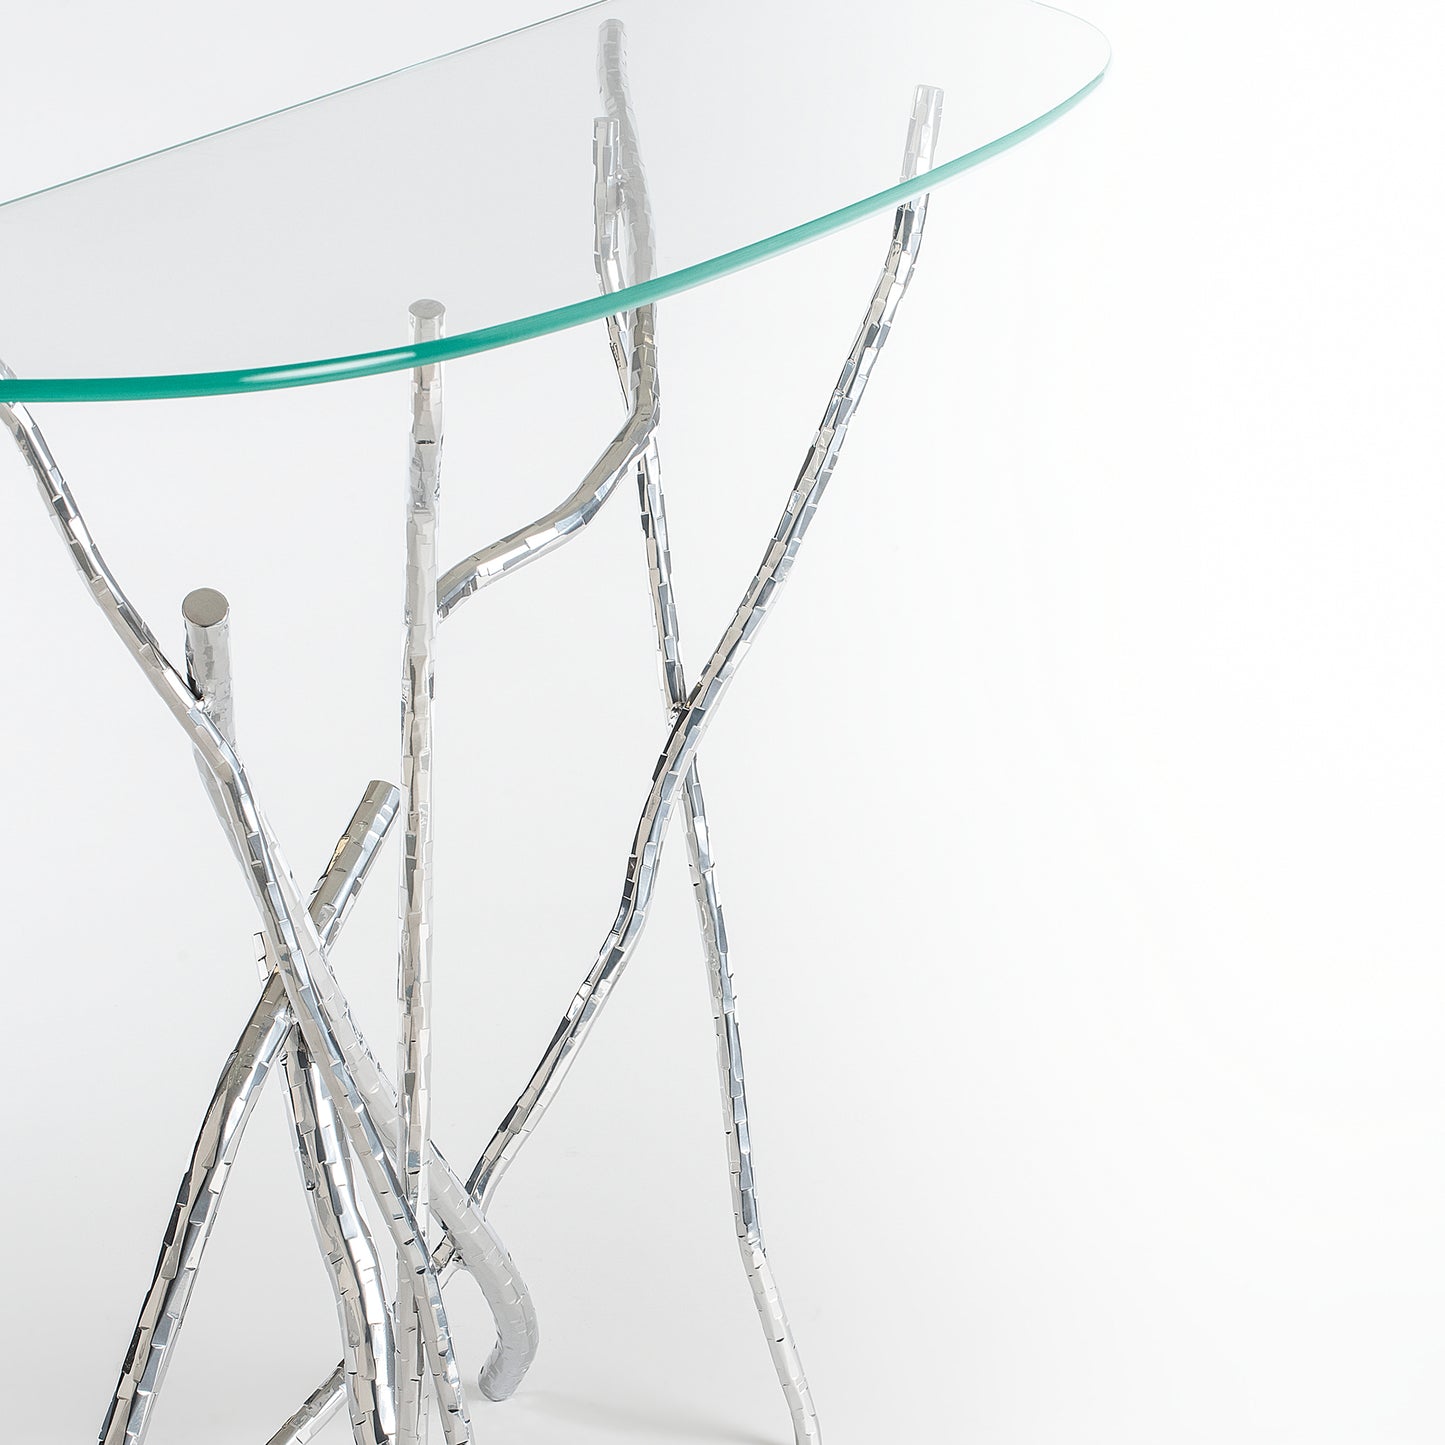 The Hubbardton Forge Brindille Console Table features a designer glass console table adorned with elegant branches.